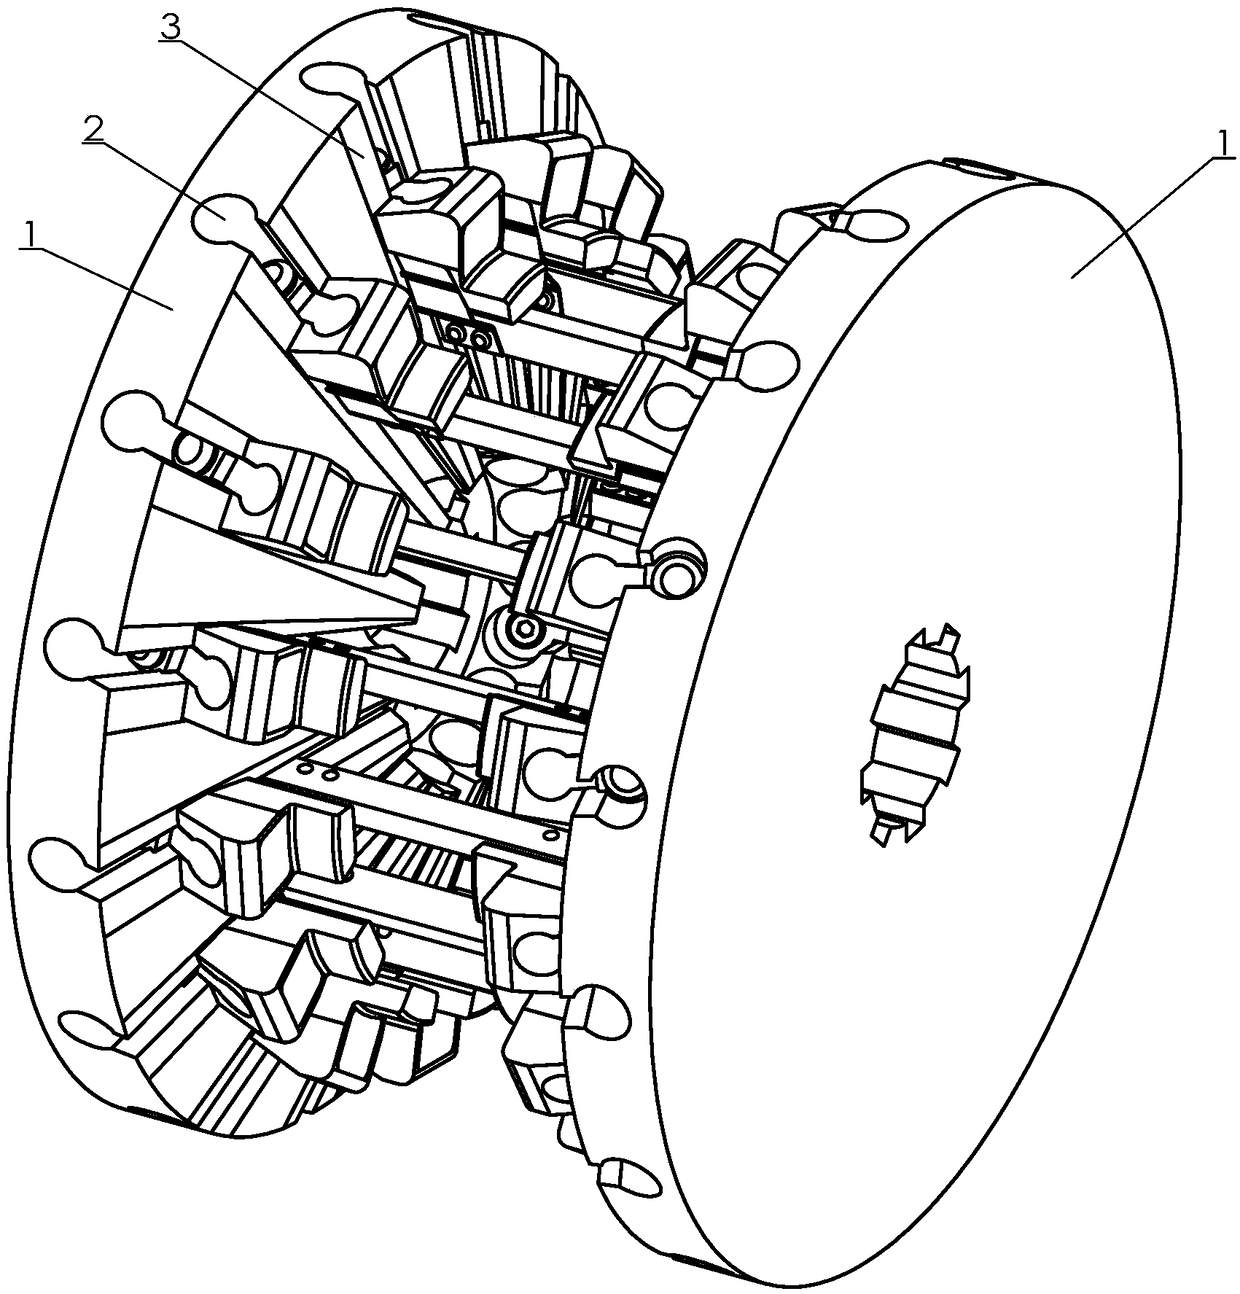 Variable diameter wheel and continuously variable transmission using variable diameter wheel